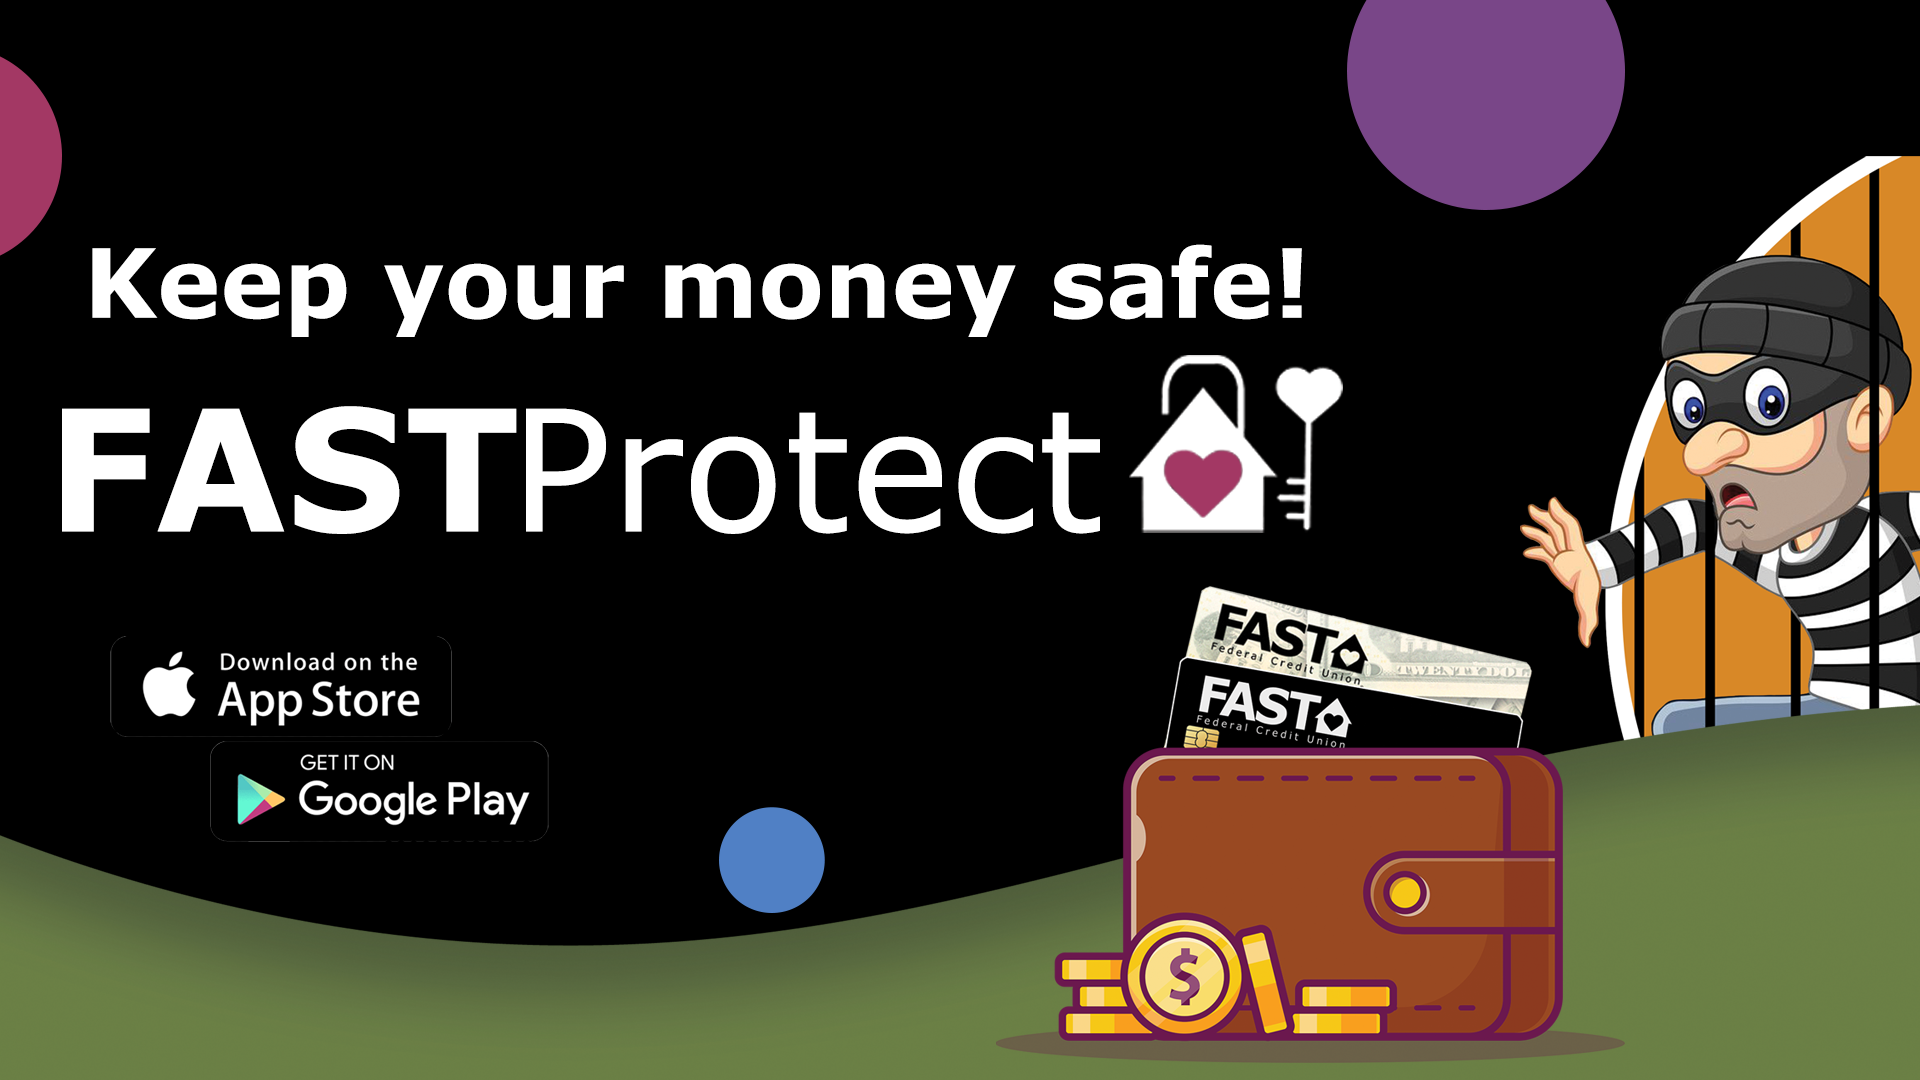 Keep your money safe! FAST Protect. Download on the APP Store. Get it on Google Play